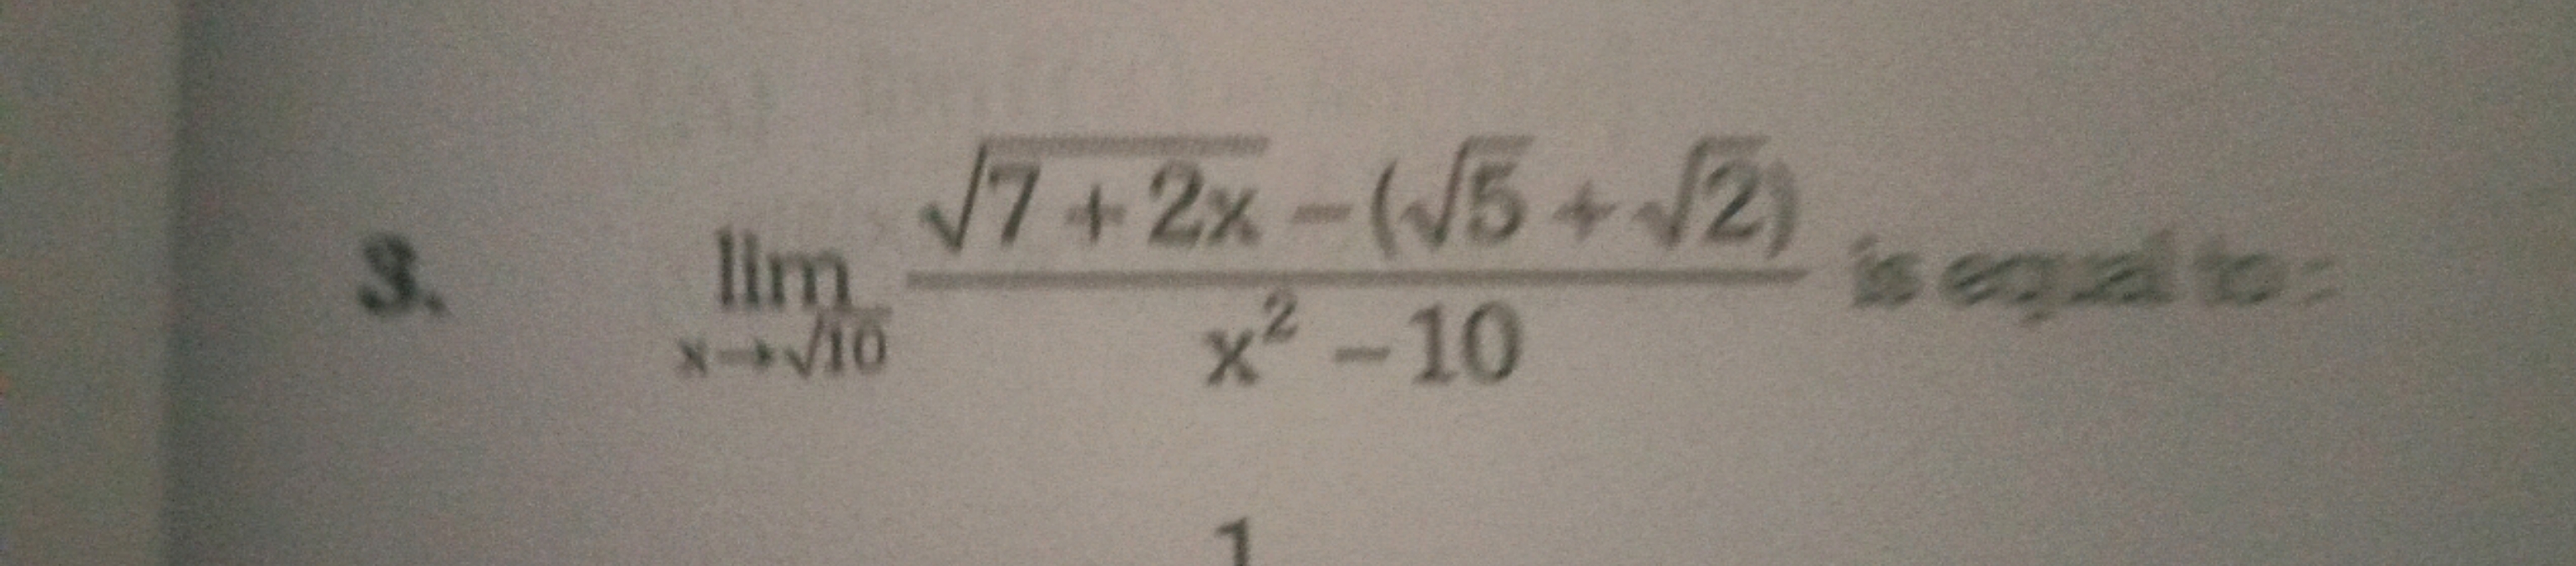 3. limx→10​​x2−107+2x​−(5​+2​)​ is equal to=
